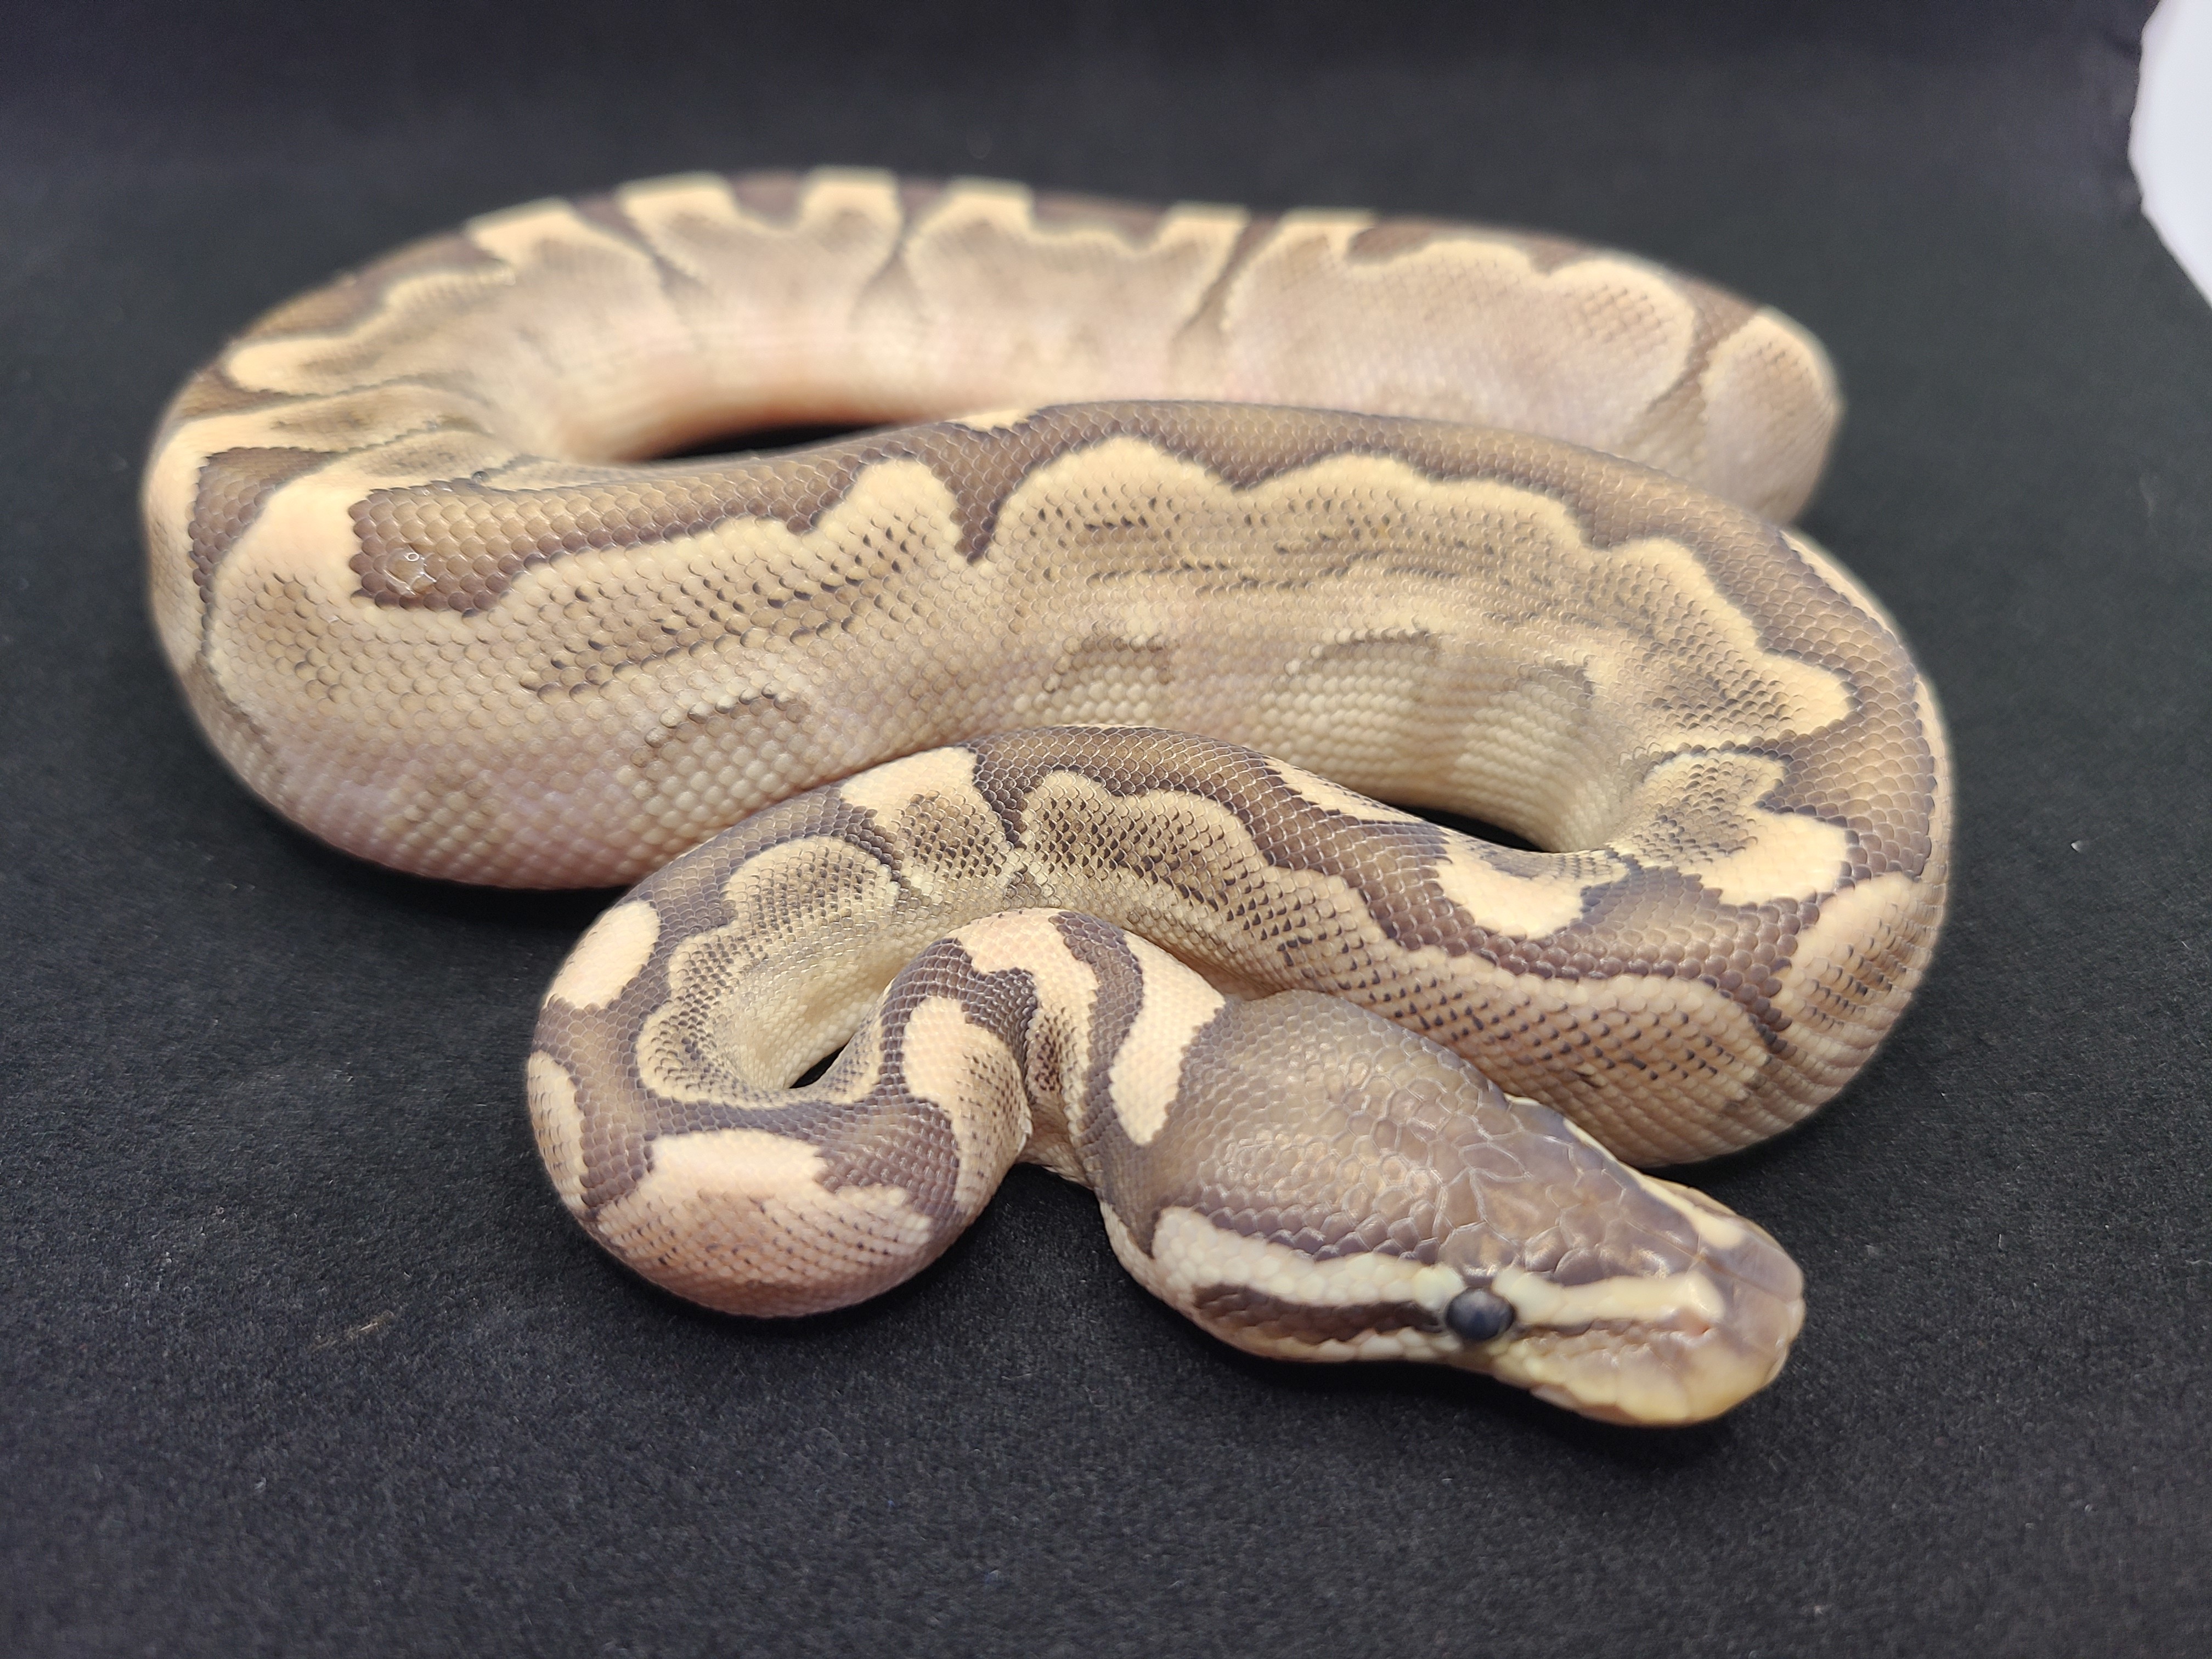 Bamboo Ball Python by Deans Reptiles and Rodents (#453525)